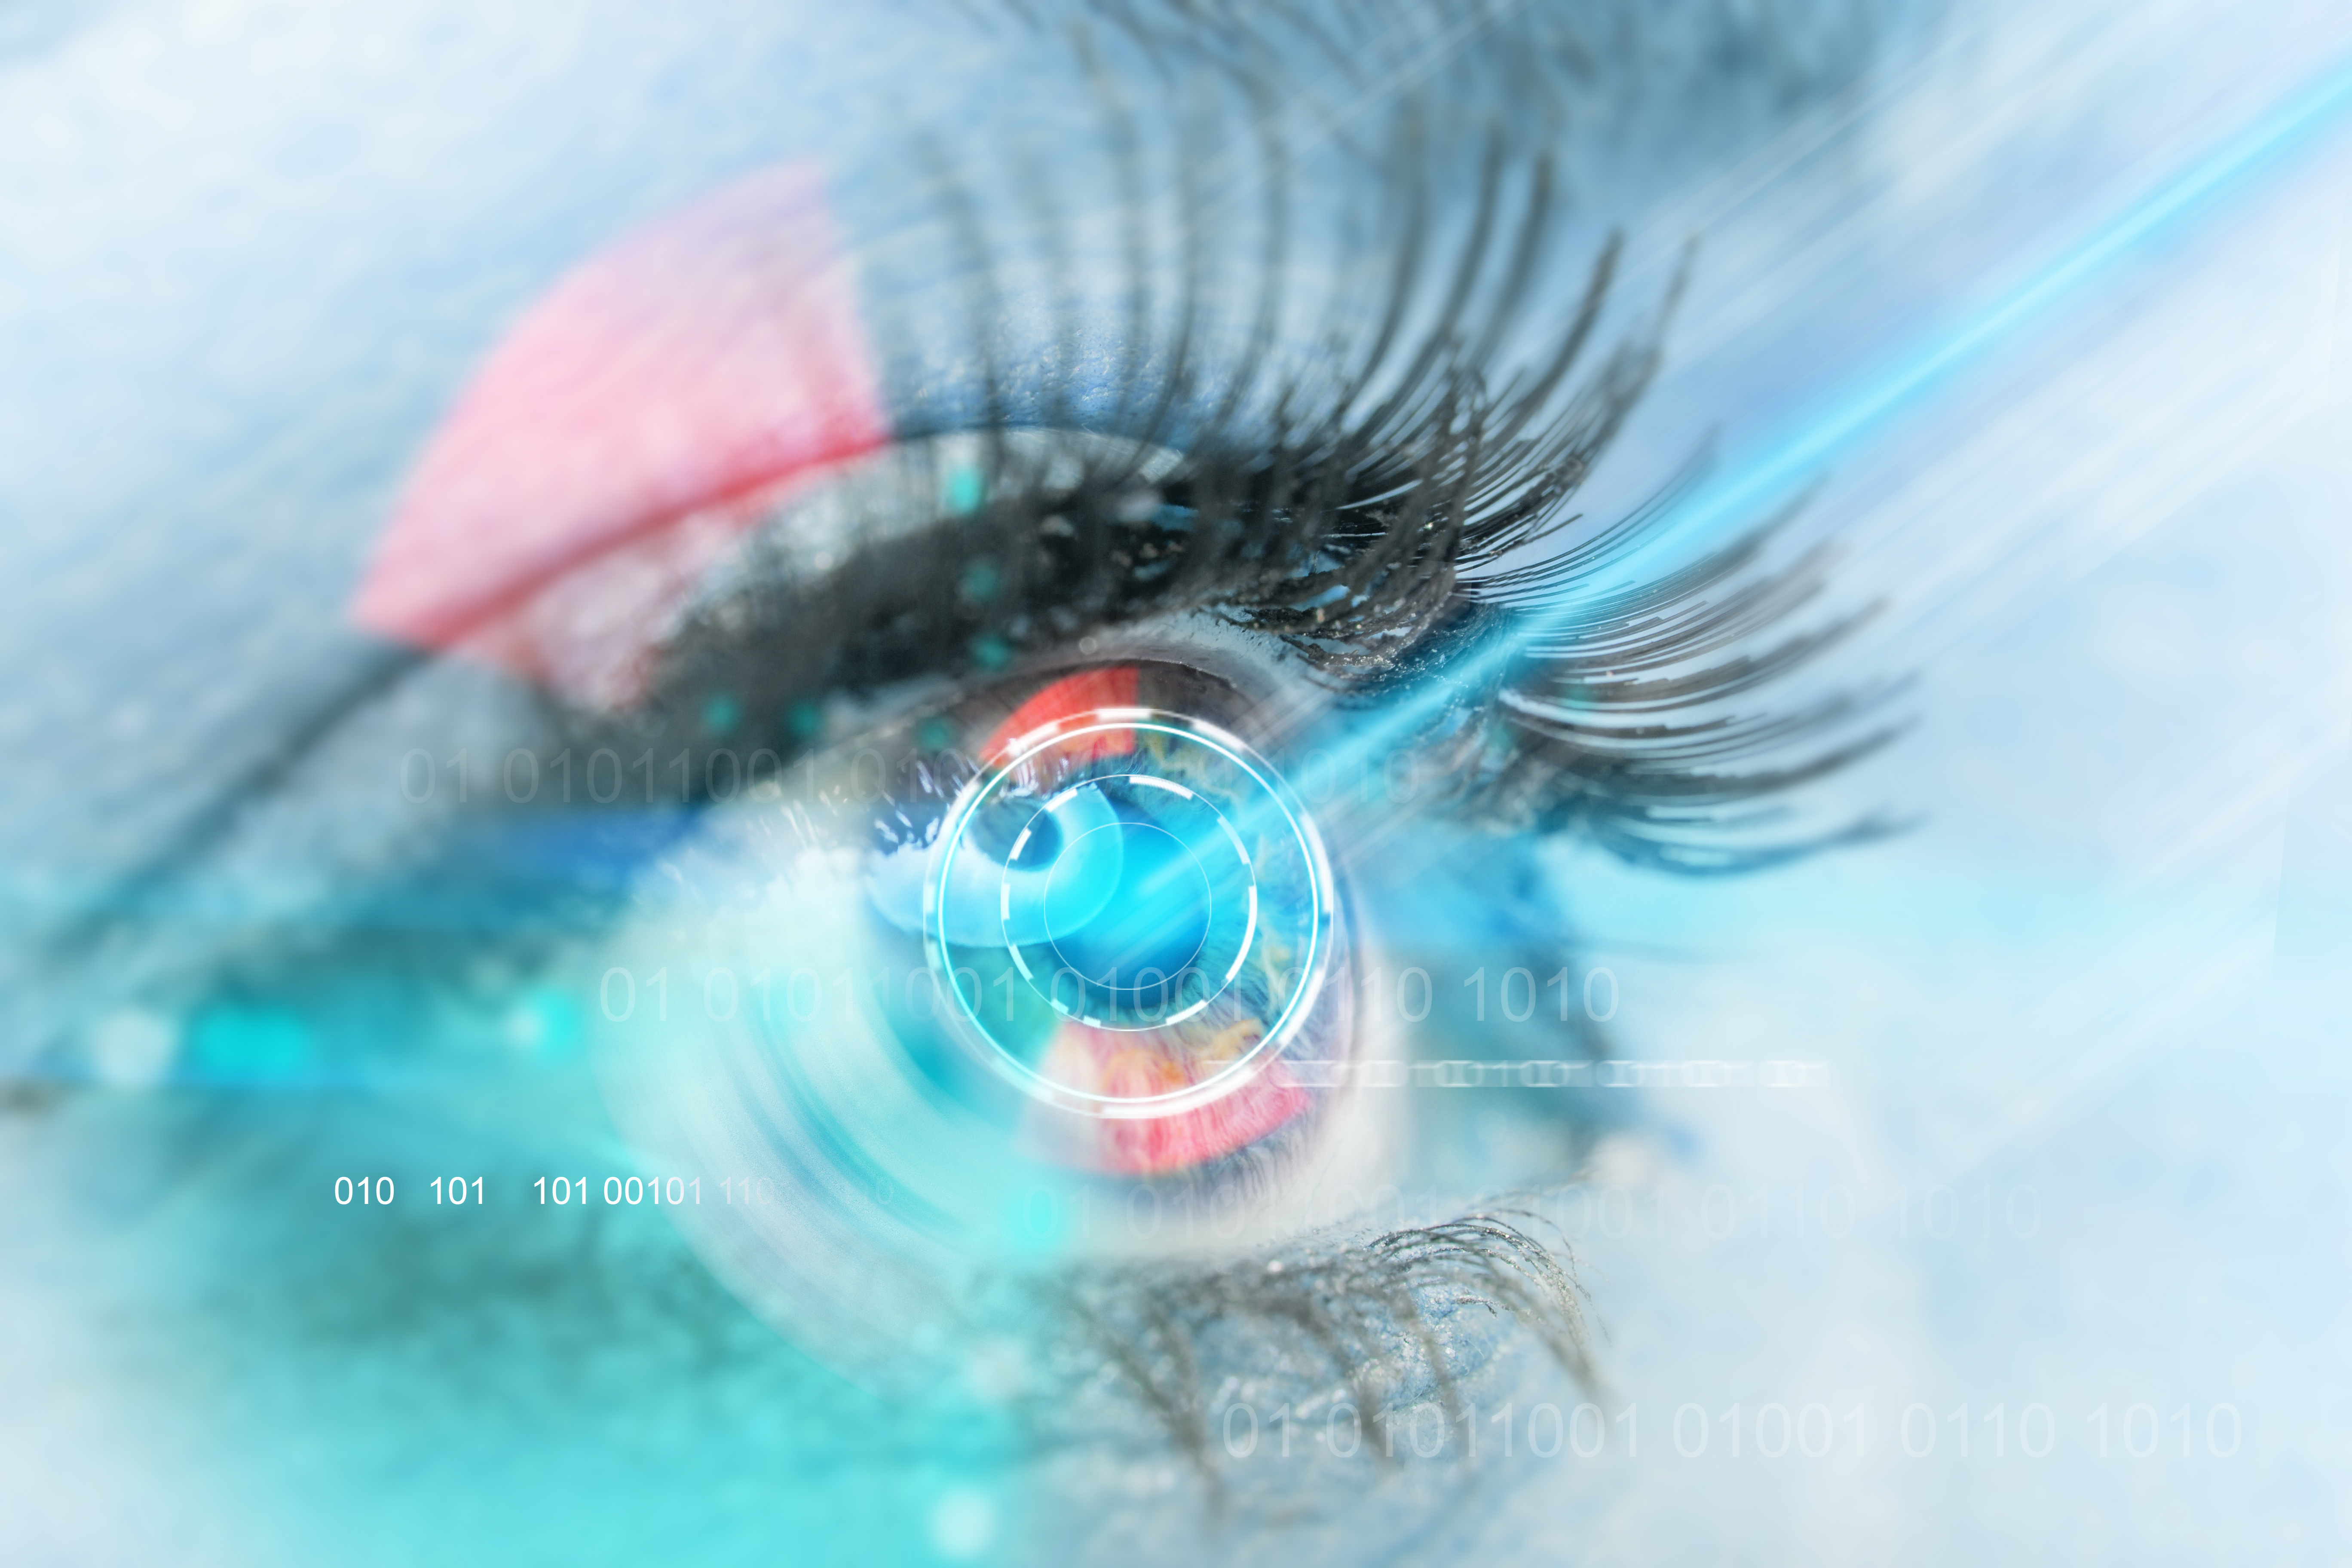 eye scan interface - copyrighted by Lukas Gojda at stock.adobe.com-ID 88816746